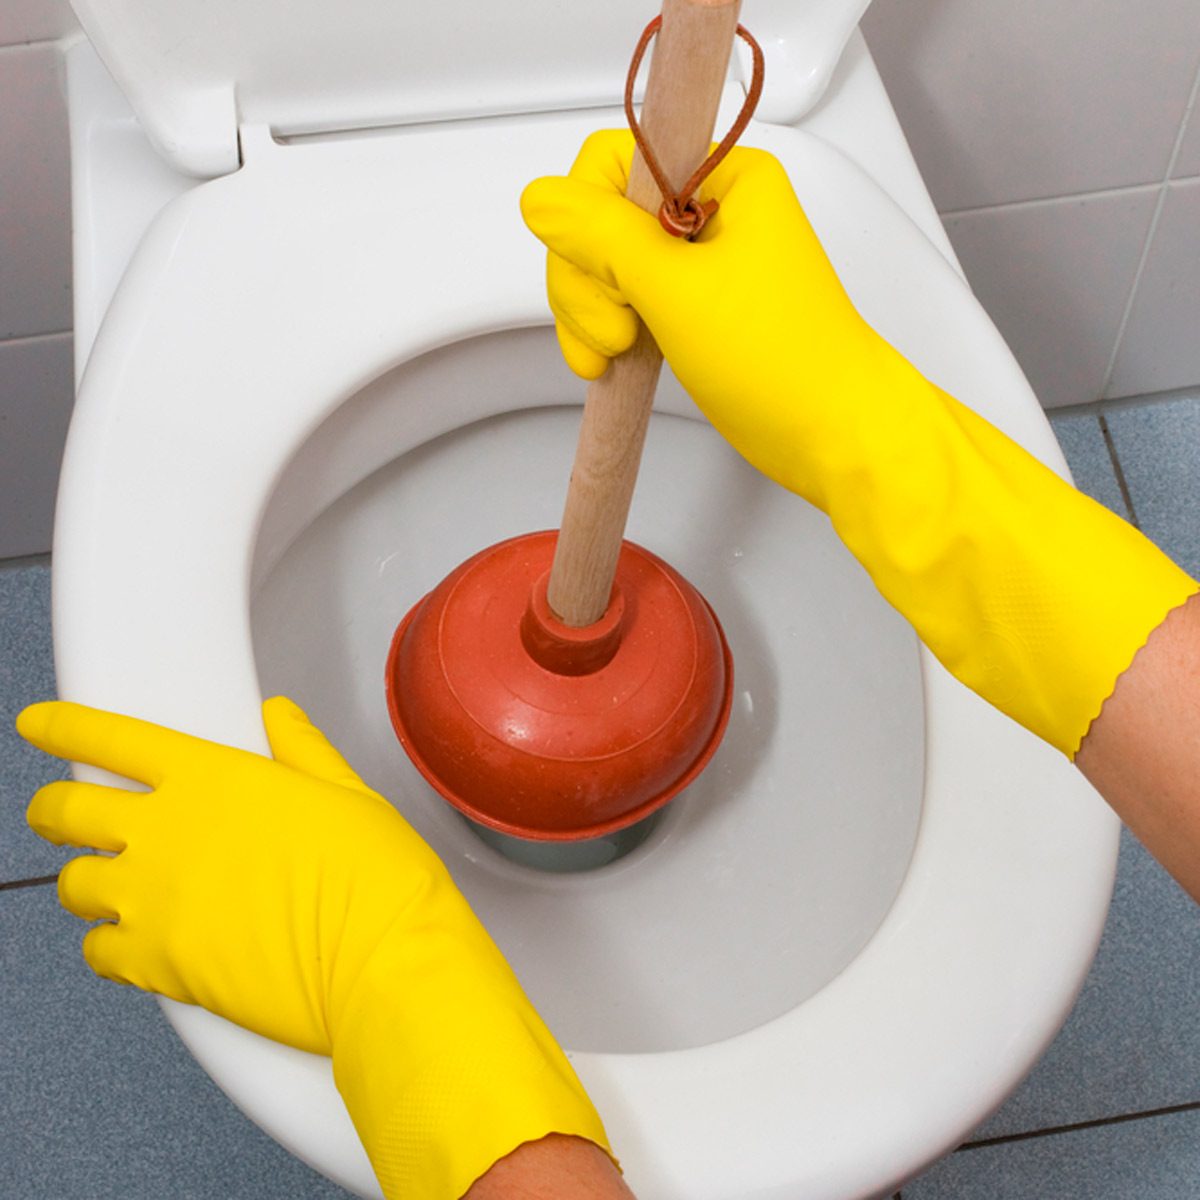 Best Ways to Unclog a Toilet